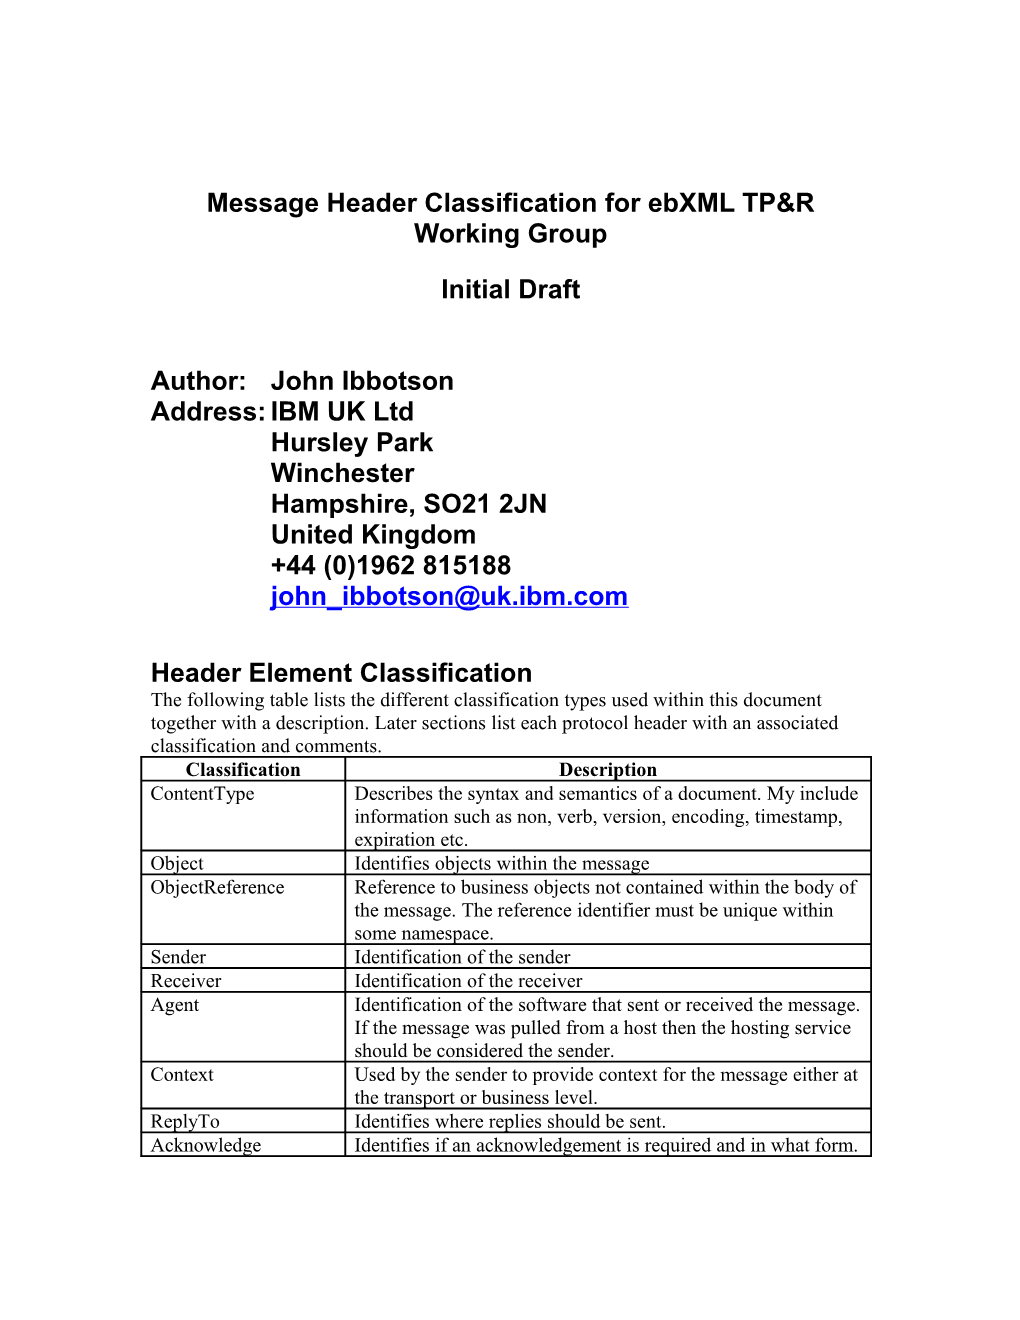 Message Header Classification for Ebxml TP&R Working Group